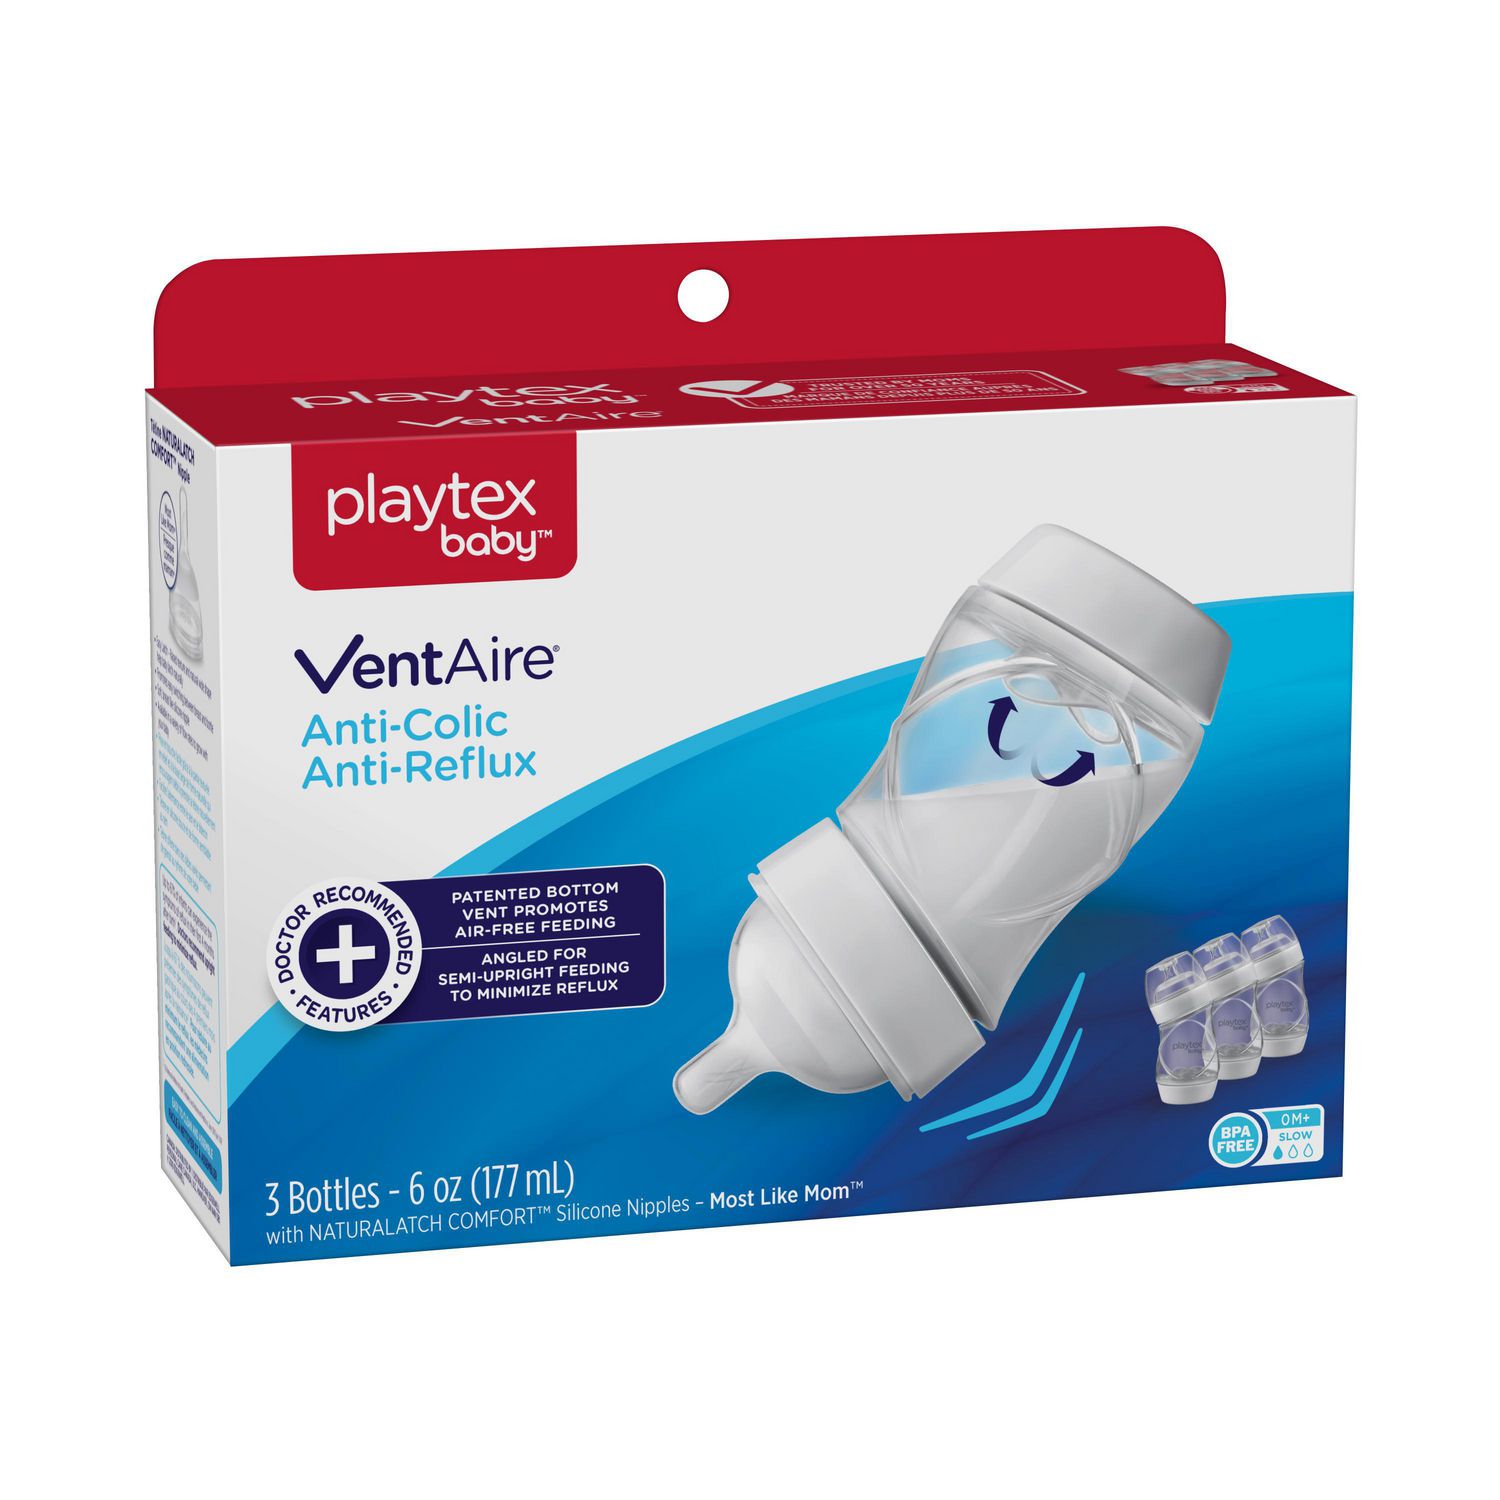 Playtex Baby™ Ventaire Bottles with NATURALATCH® Silicone Nipples